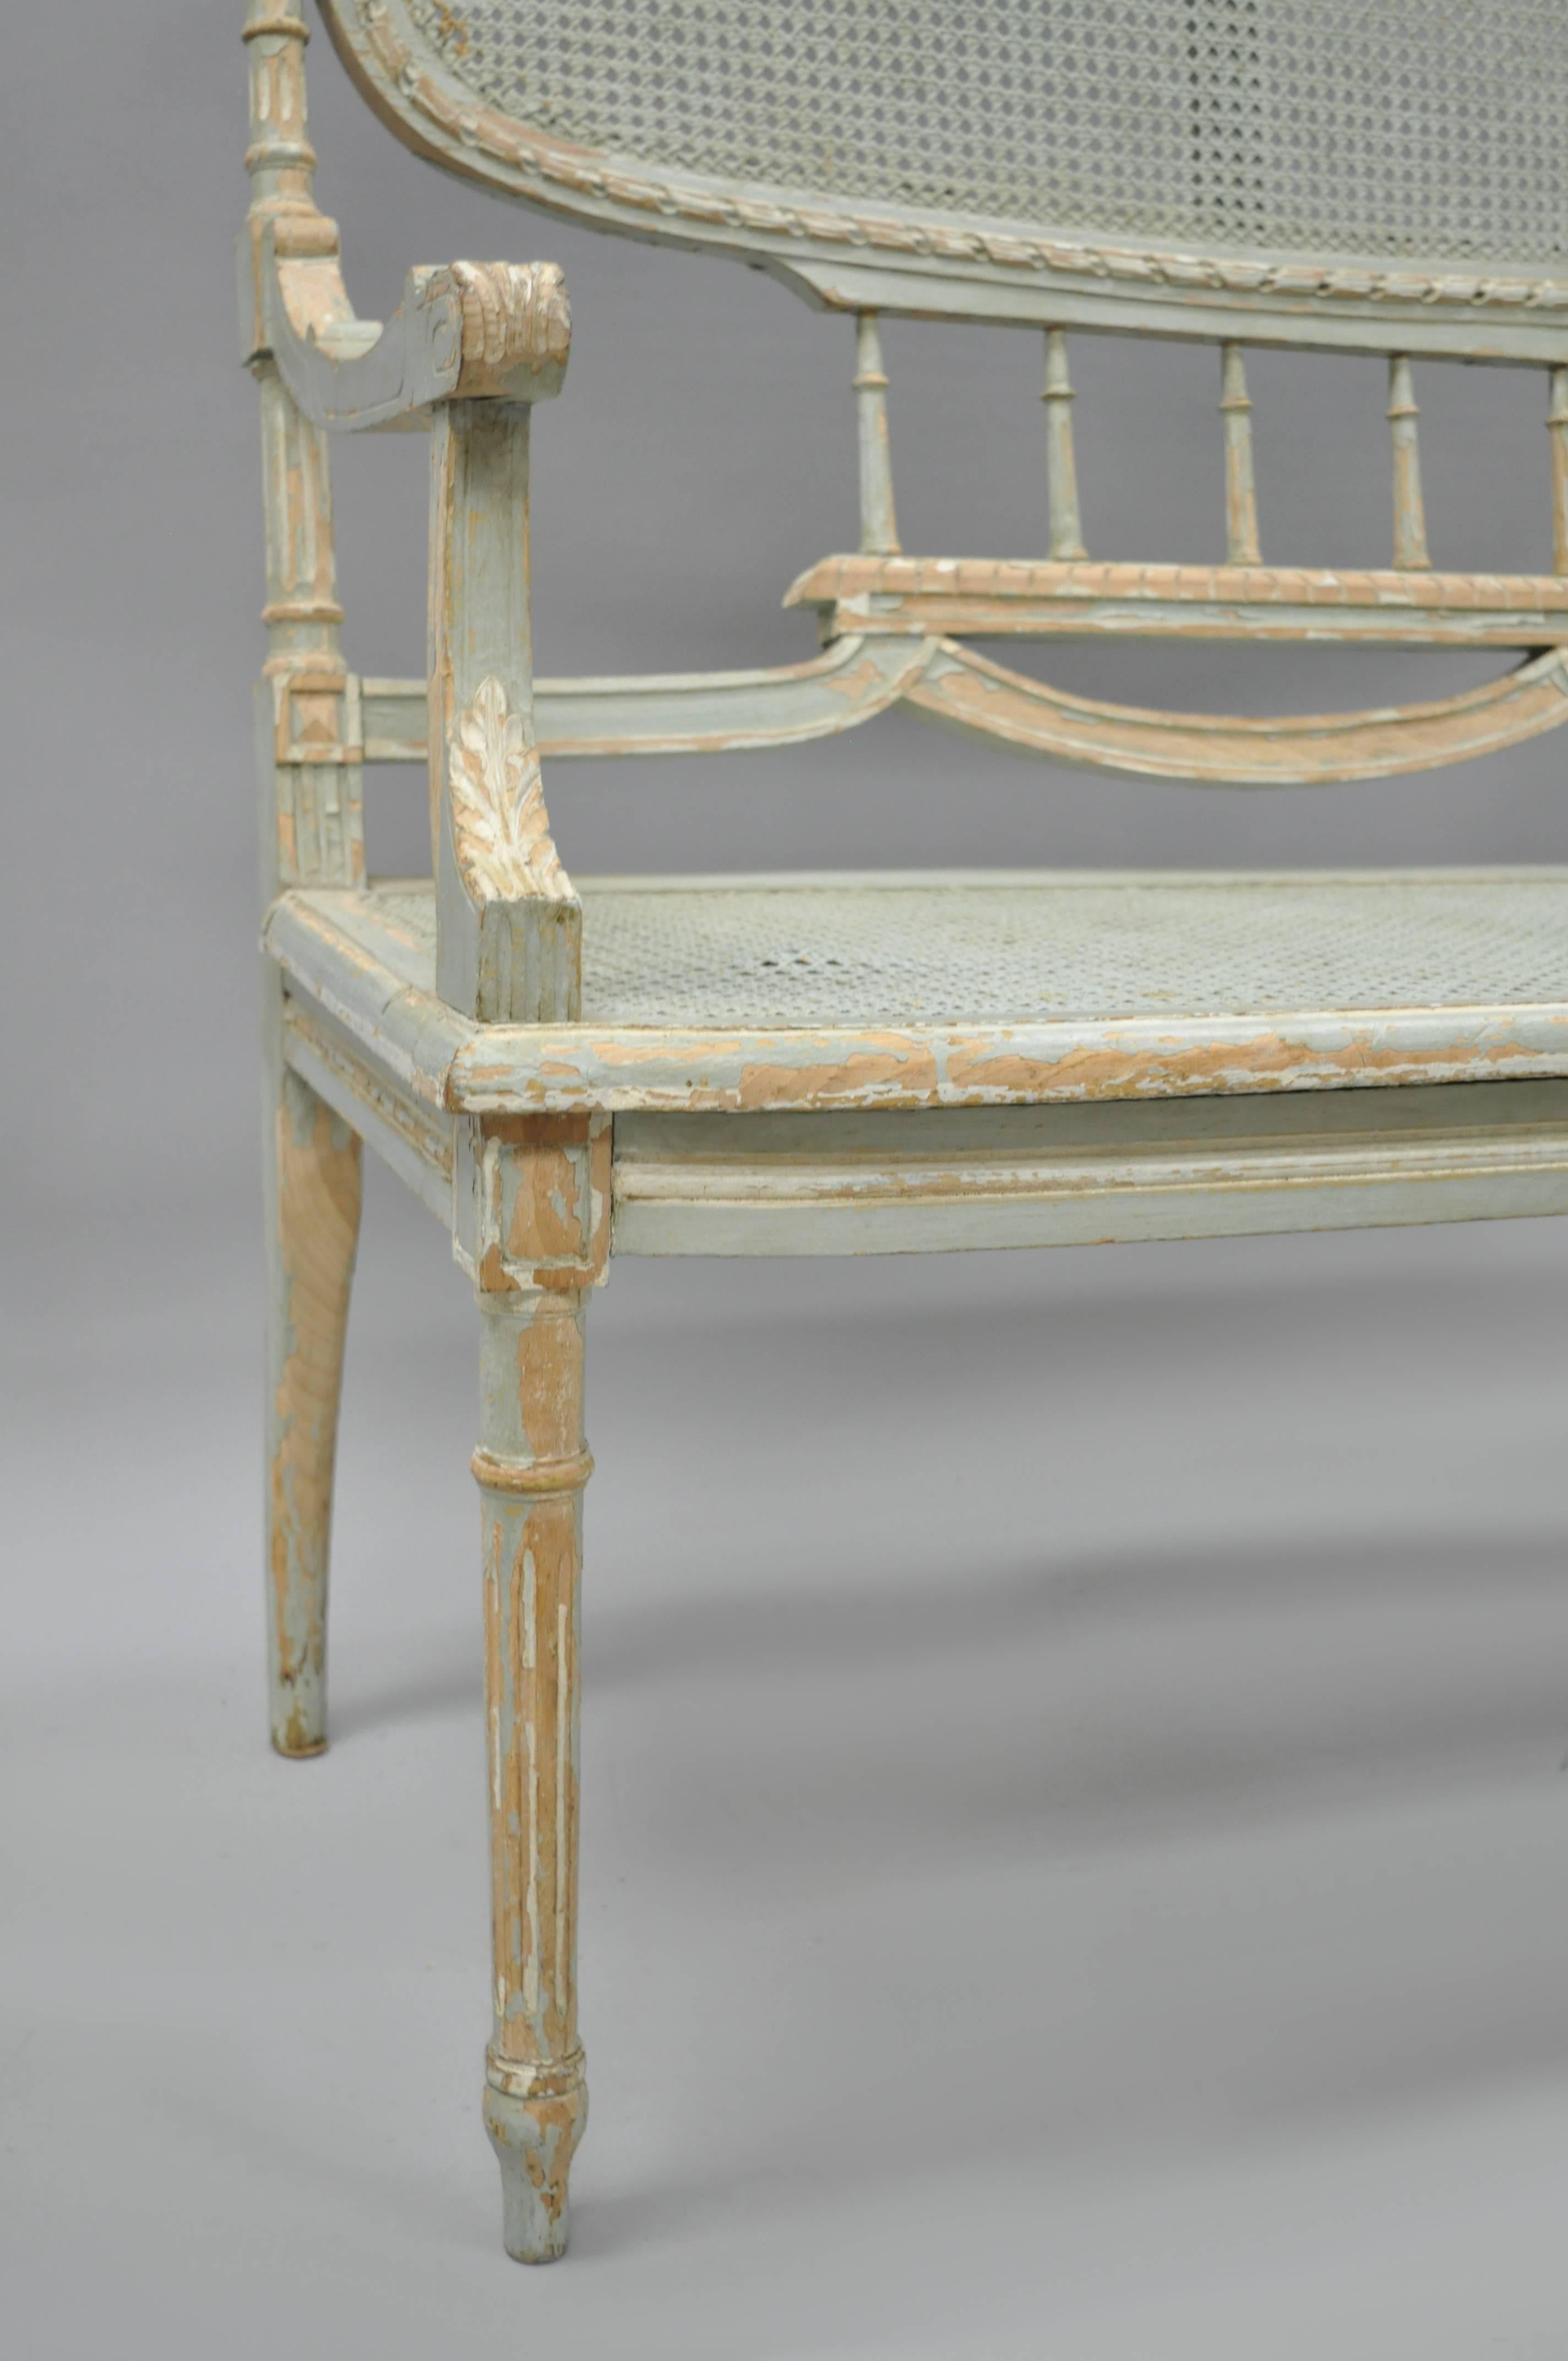 Wood 20th C French Louis XVI Style Blue Distress Painted Parlor Salon Settee Loveseat